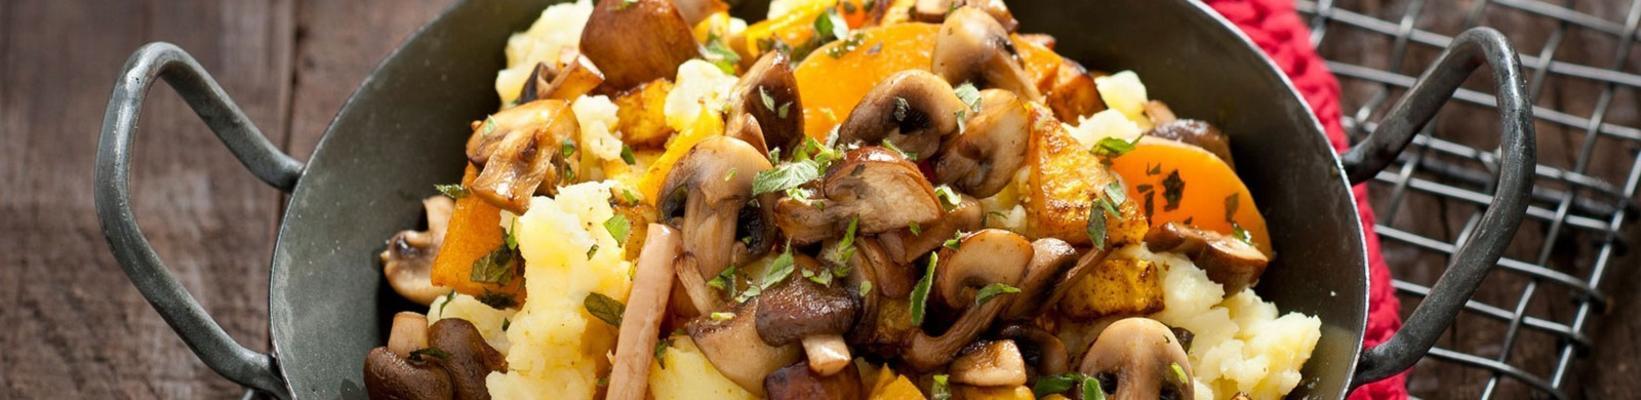 stew of squash and mushrooms from edwin florès